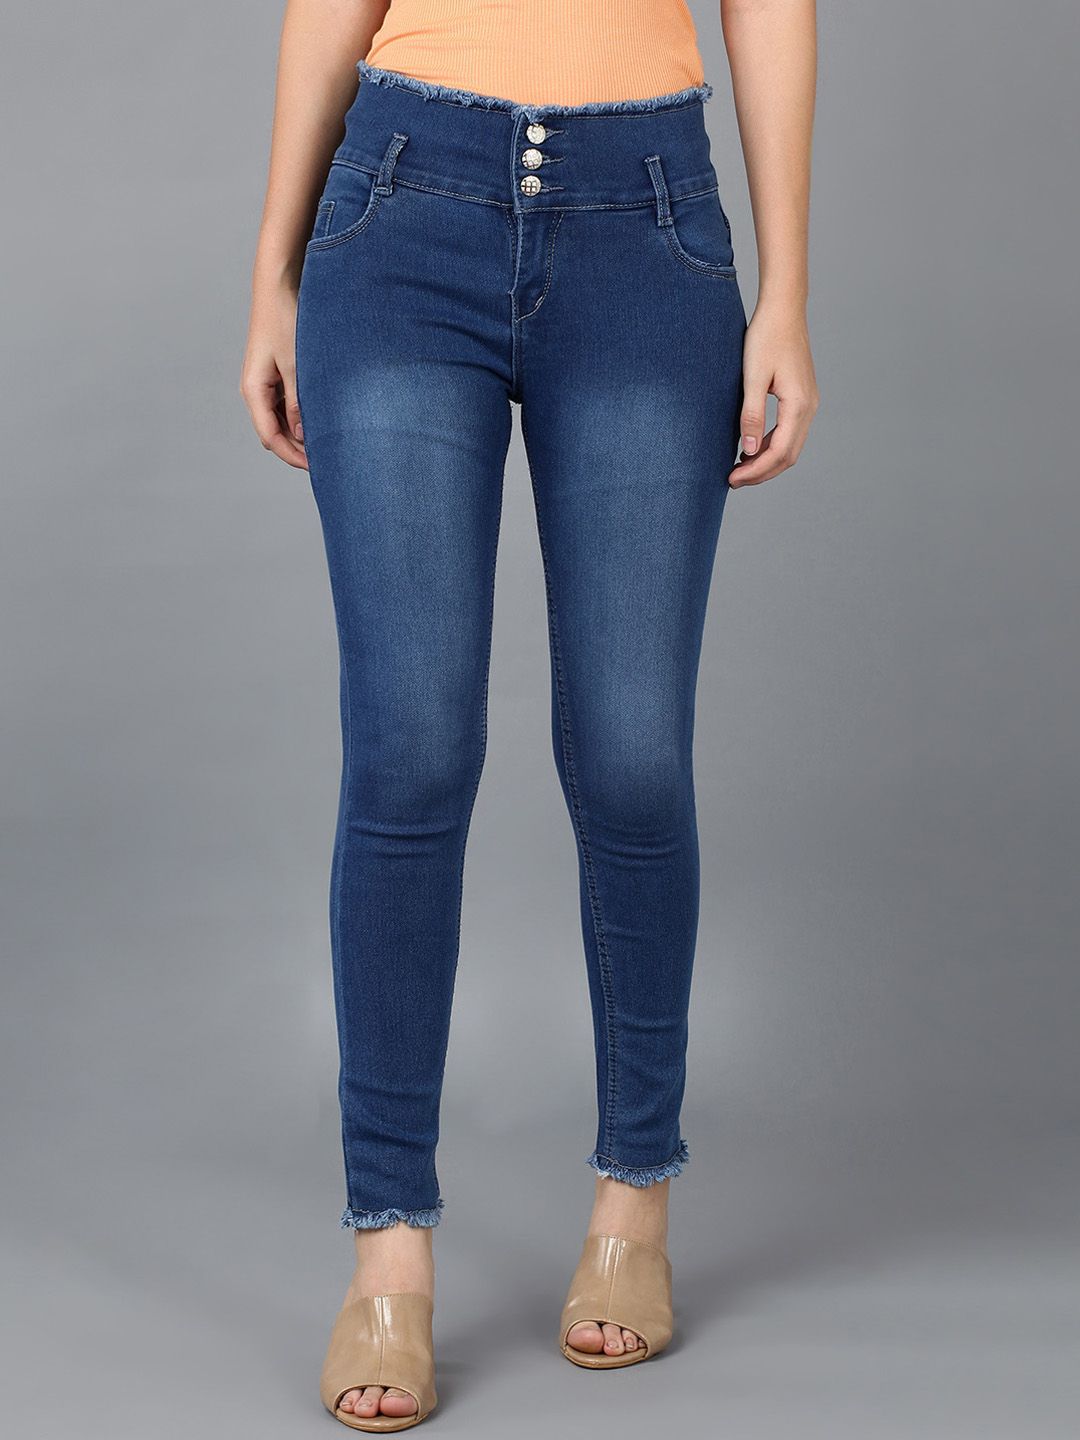 F2M Women Blue Slim Fit High-Rise Light Fade Stretchable Jeans Price in India